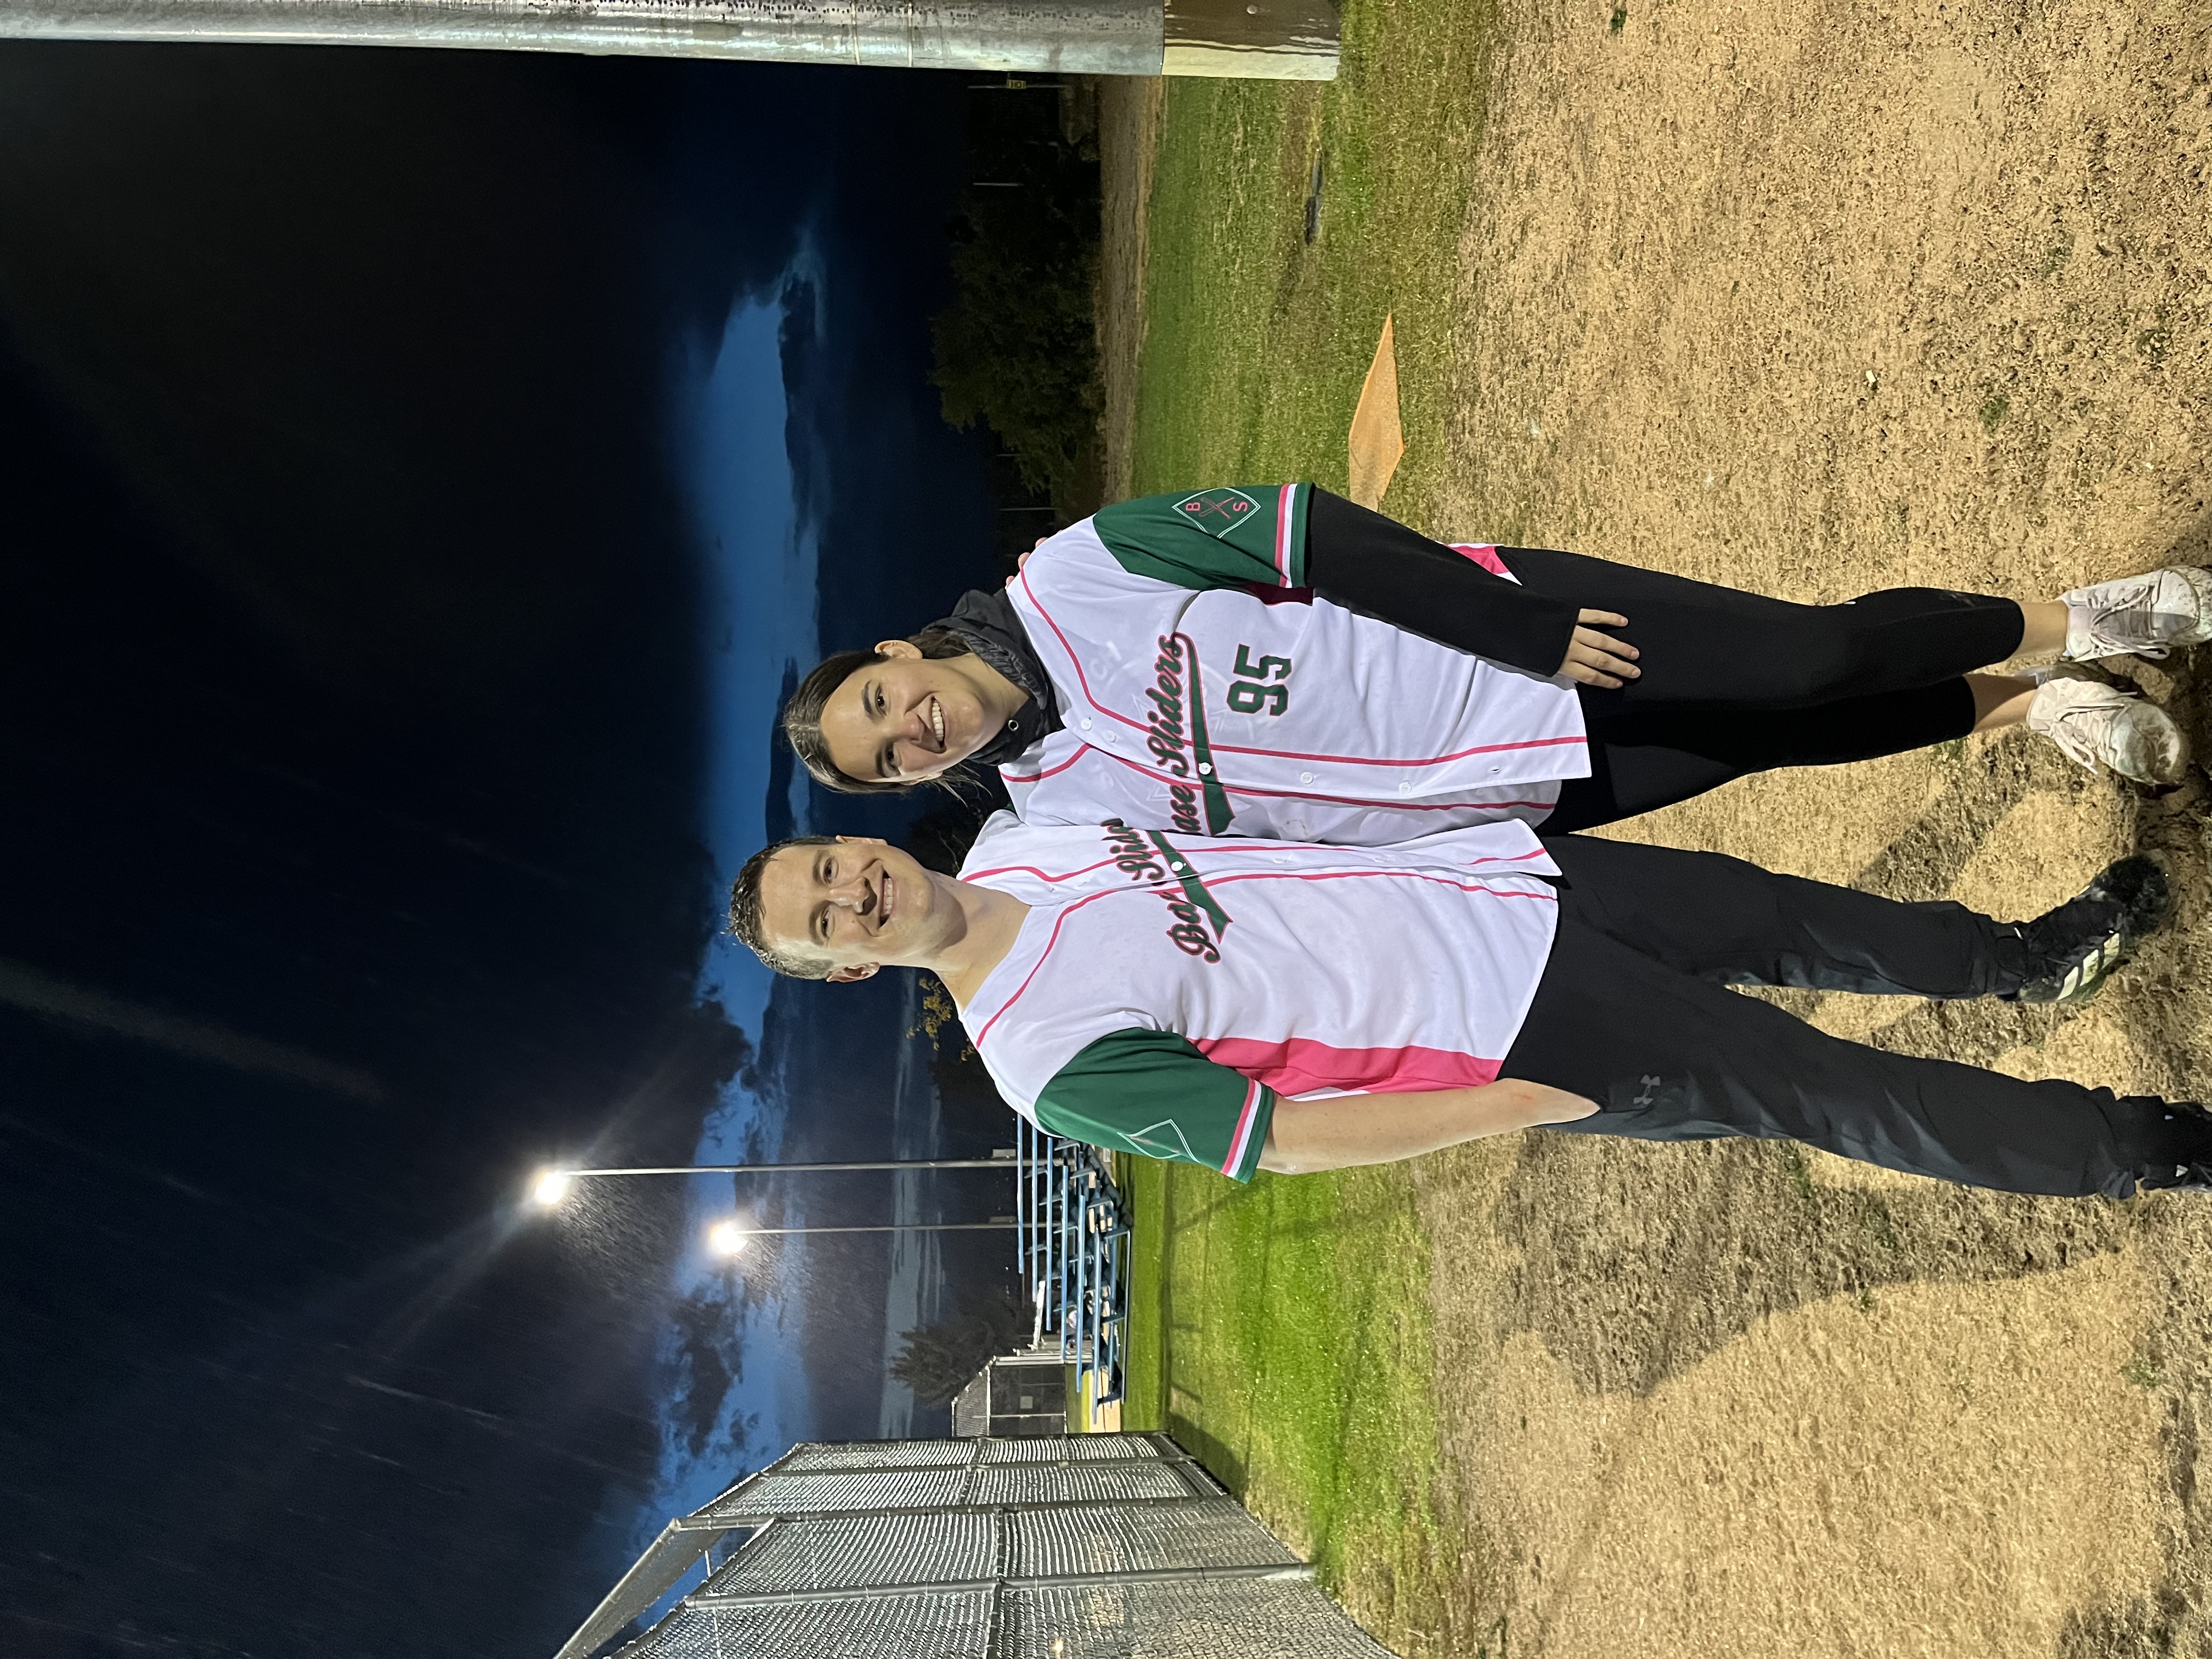 Two people stand together wearing softball jerseys at a ballpark diamond in the evening